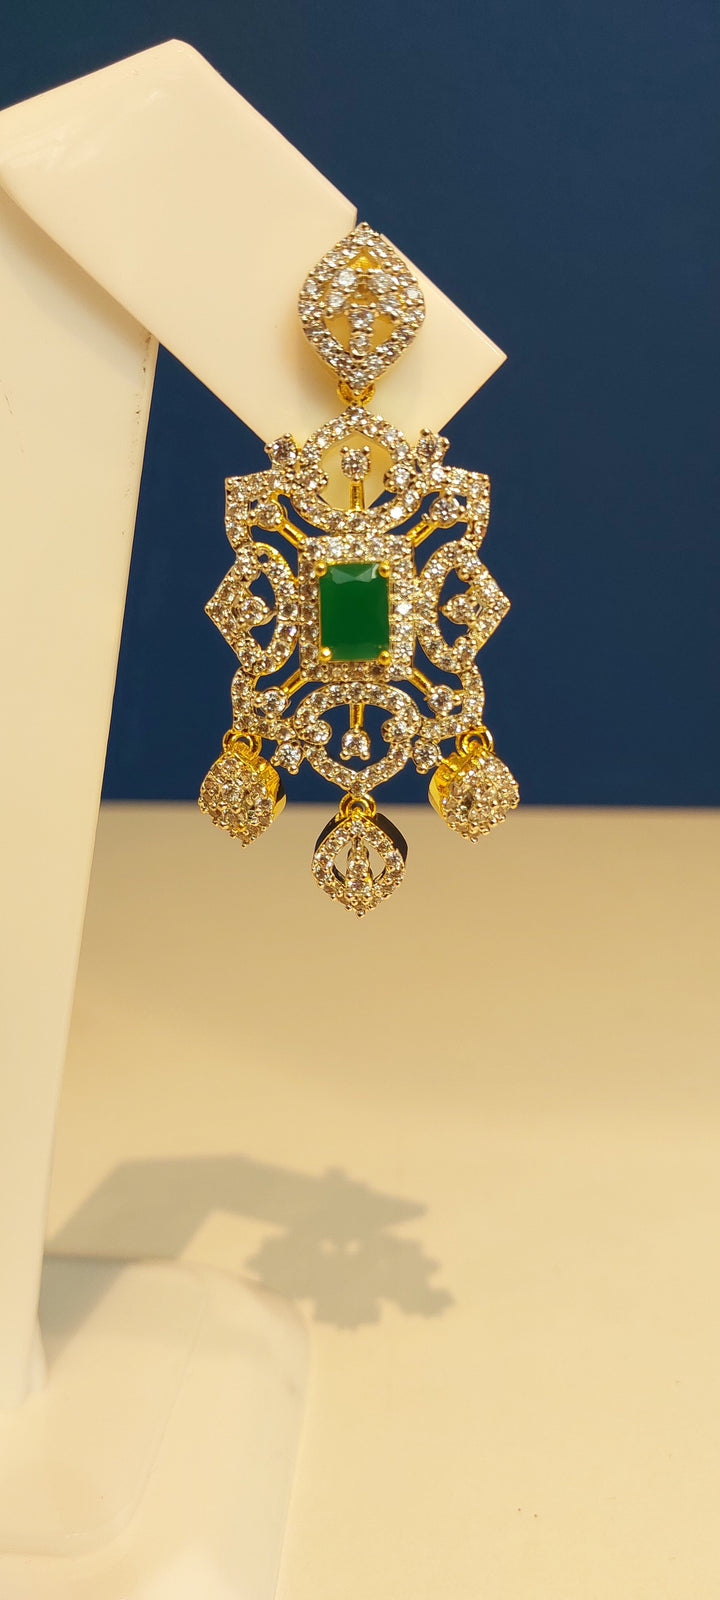 Riddhima Zircon Diamond, Gold and Emerald Destination Necklace and Earrings Set